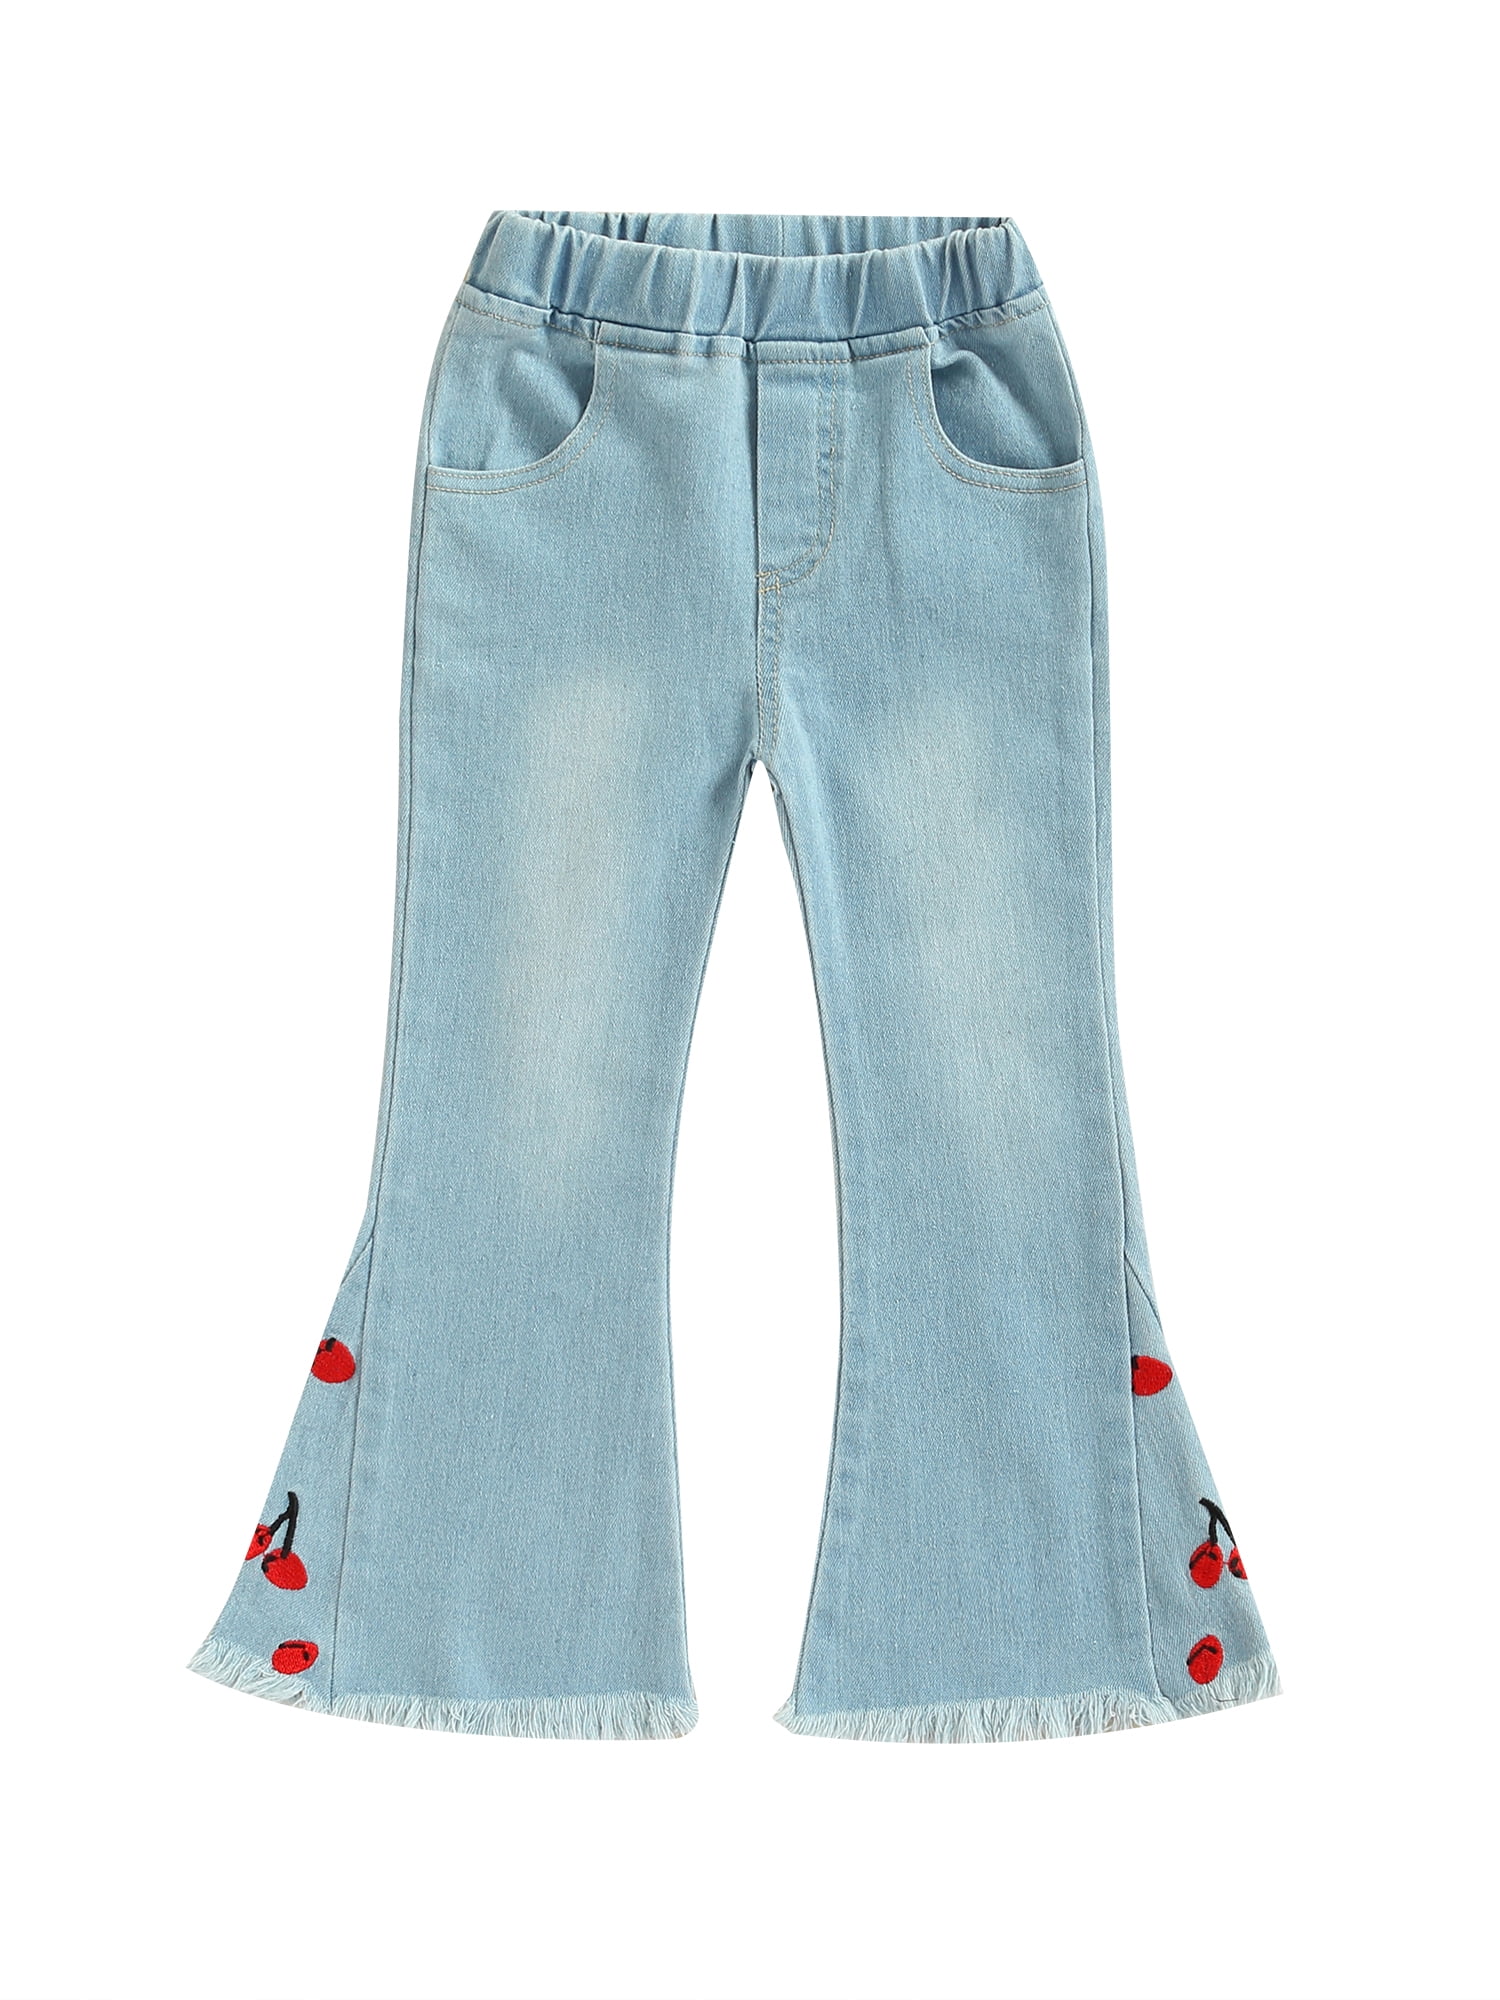 Kids Toddler Girl Denim Flared Pants Cherry Embroidery Wide Legs Jeans Girls Casual Bell Bottom Trousers for 0-6 Years 